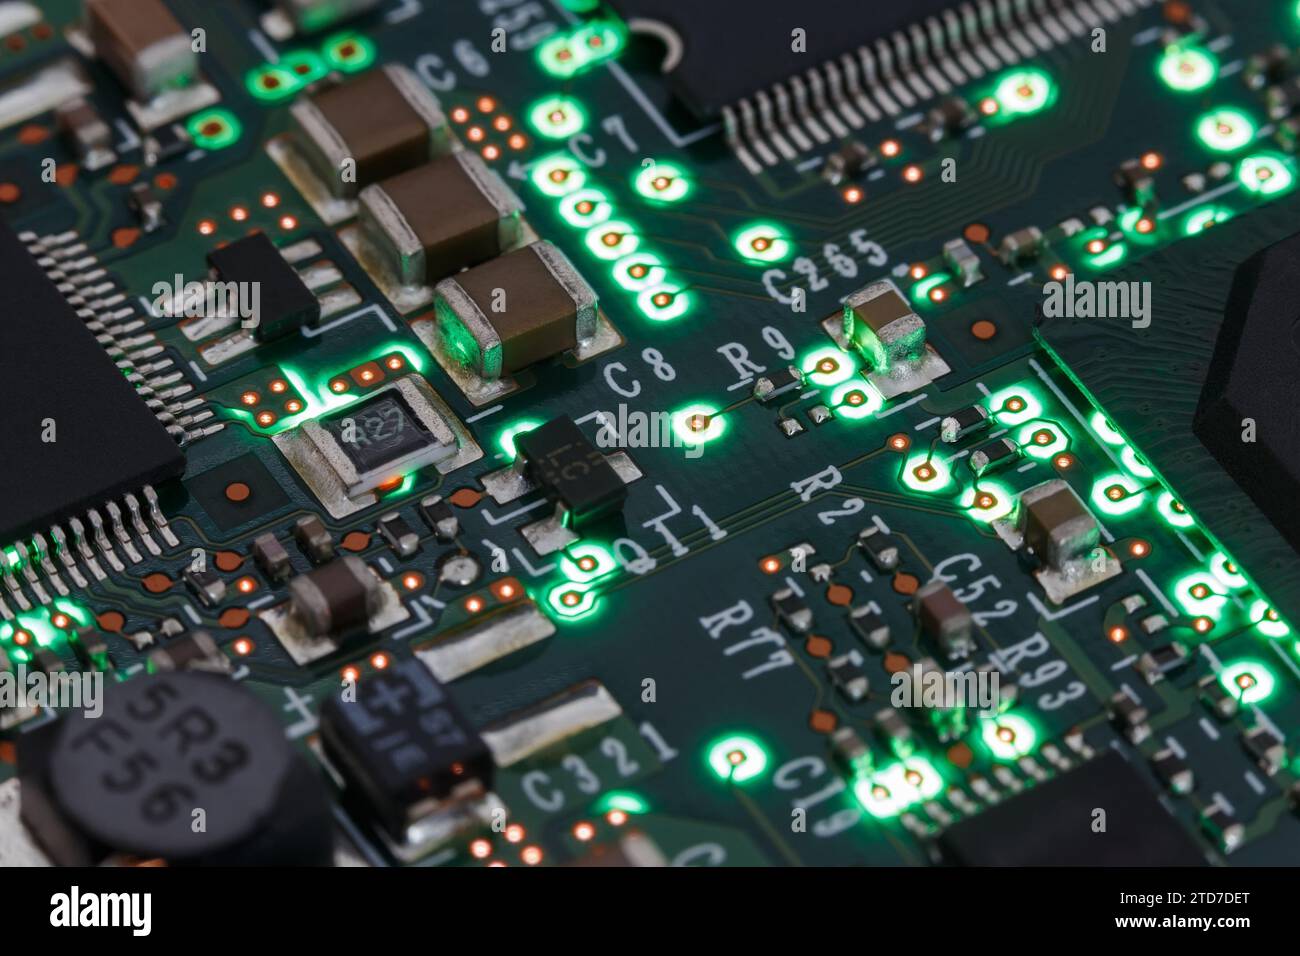 Printed circuit board with various elements, with green illumination. Macro photography Stock Photo